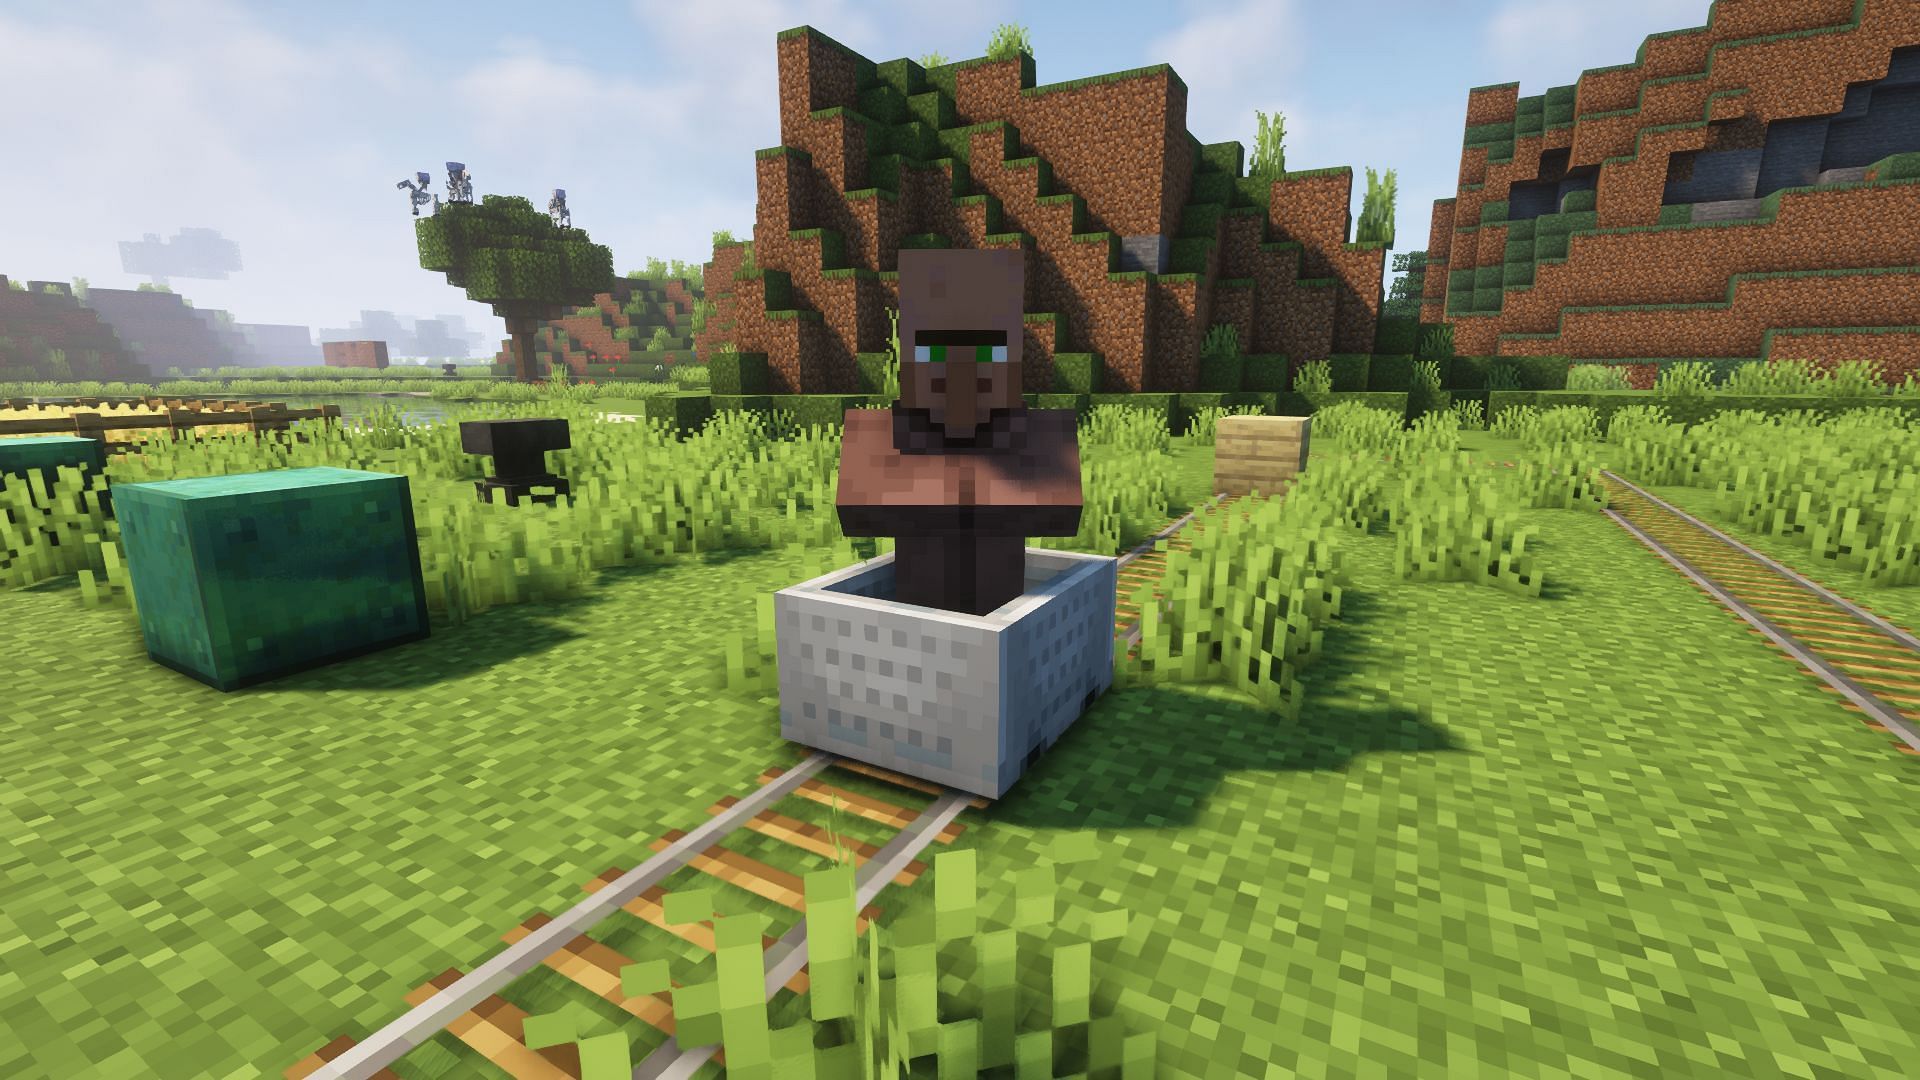 A villager in a wagon (Image via Minecraft)